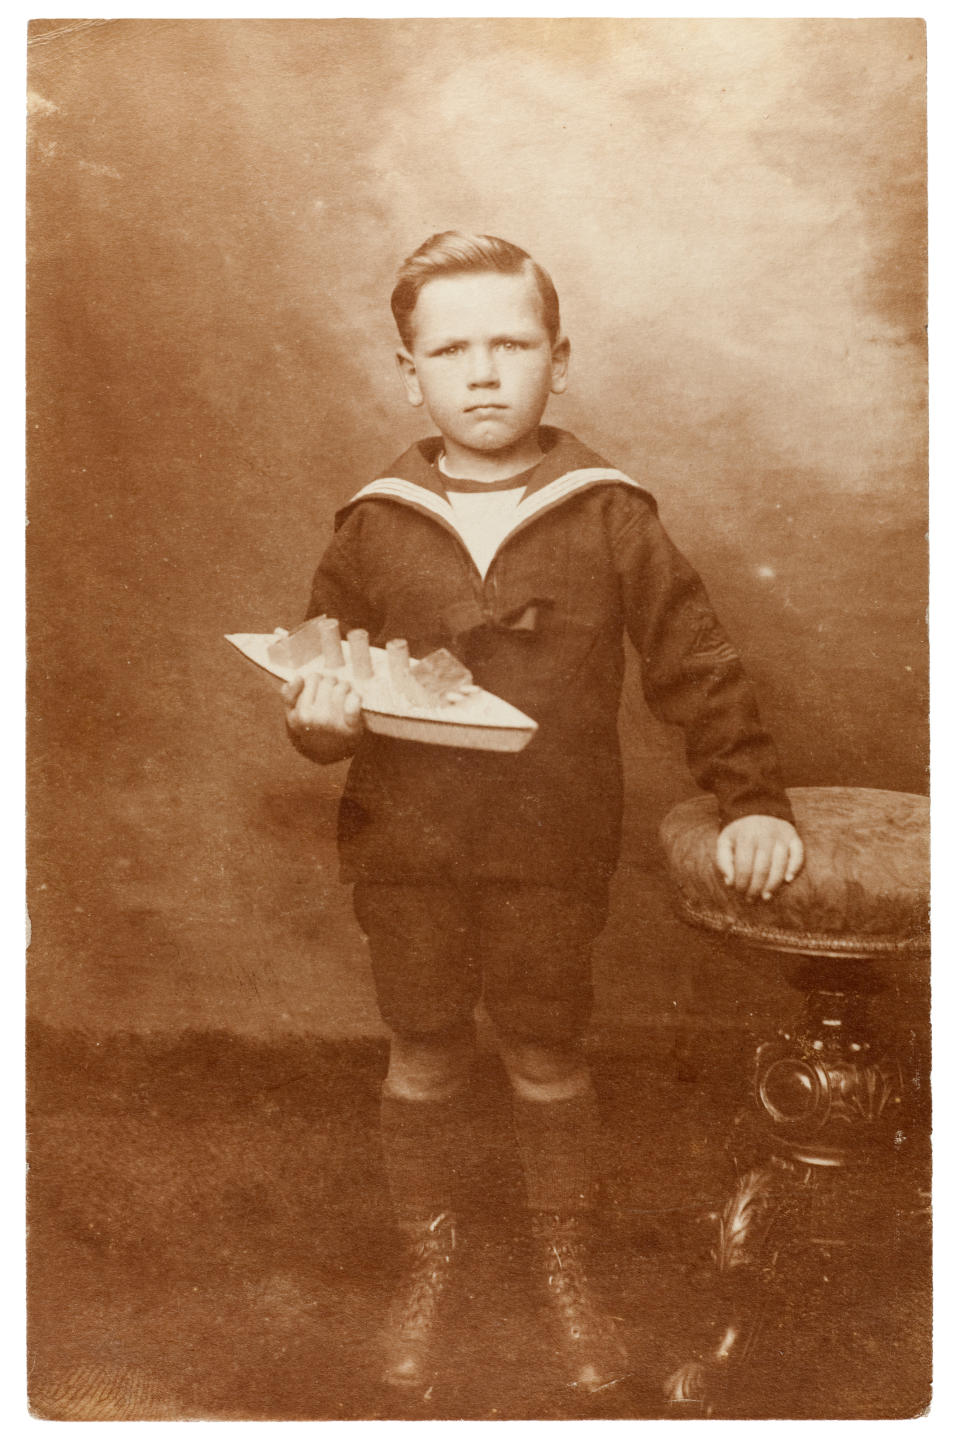 photo of a young boy in a sailor's outfit holding a toy boat, circa 1910